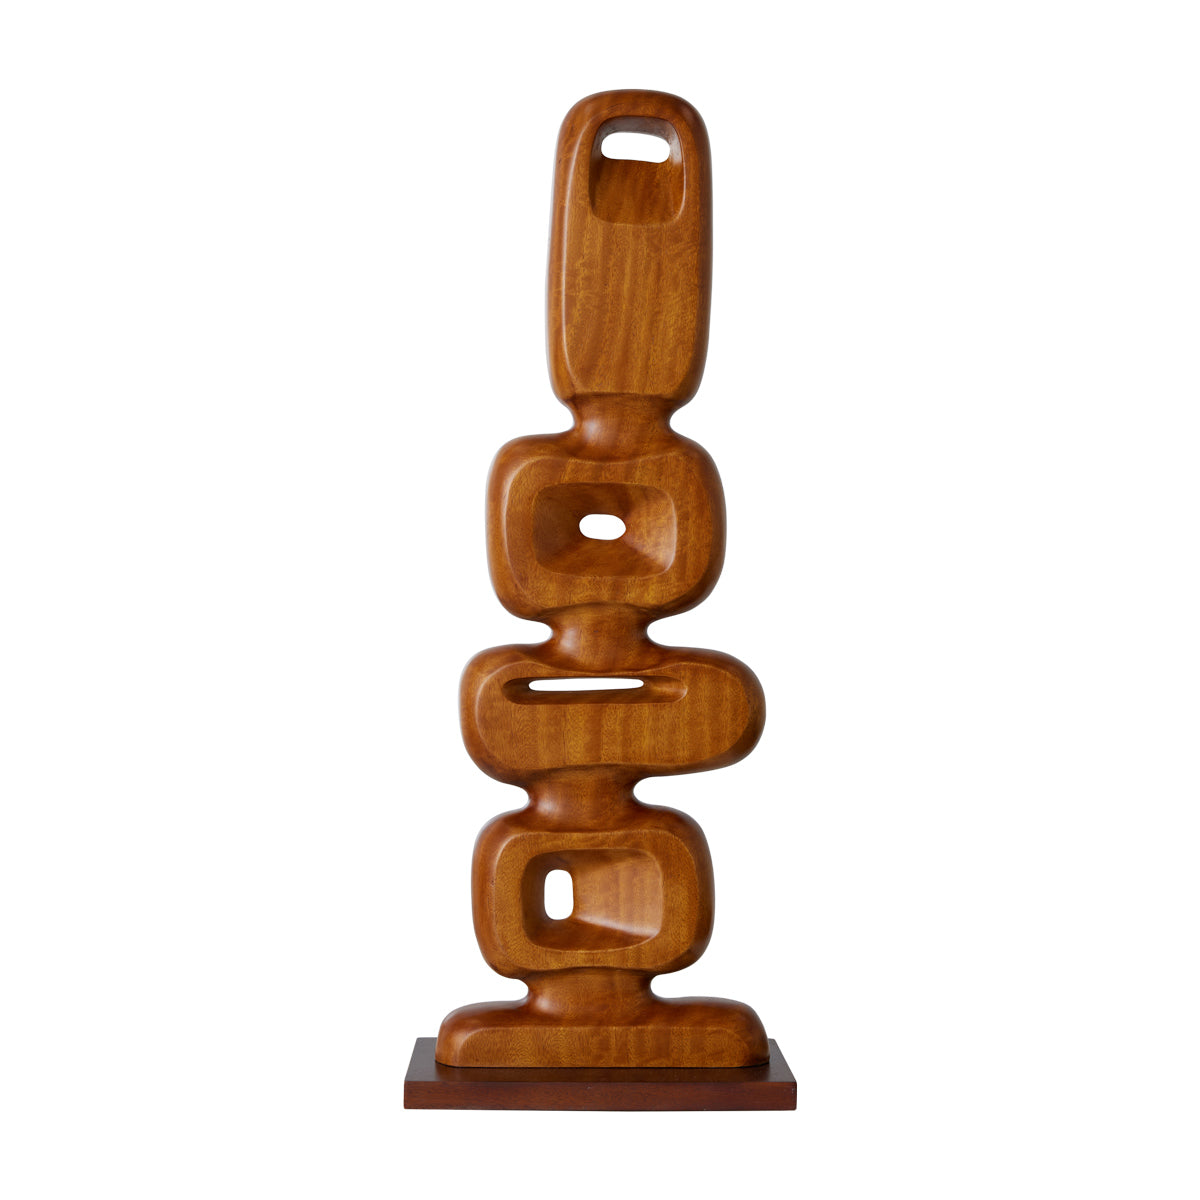 Hk Objects: Hand Carved Wooden Sculpture